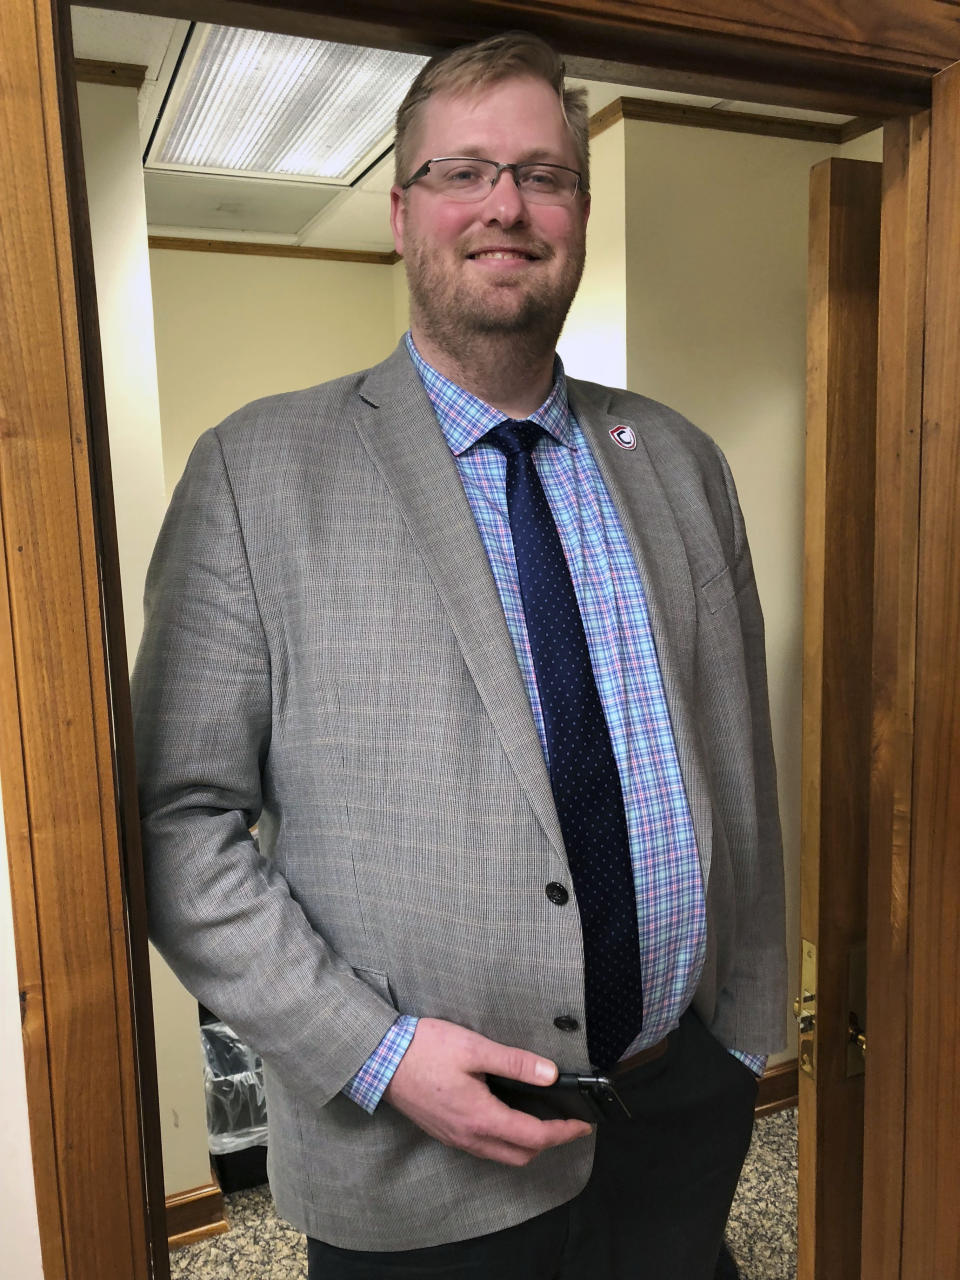 North Dakota Insurance Commissioner Jon Godfread poses for a portrait at the state Capitol in Bismarck, N.D., Thursday, March 28, 2019. Godfread, who claims he is 6-foot-11 3/4 inches, is challenging New York City councilman Robert Cornegy Jr., a 6-foot-10 councilman from Brooklyn's claim of being the tallest male politician in the world. Comegy was certified by Guinness World Records in January. But wait, Brad Sellers, a former Ohio State and Chicago Bulls star listed at 7 feet, also says he has a claim. Sellers is now the mayor of Warrensville Heights, Ohio. (AP Photo/James MacPherson).